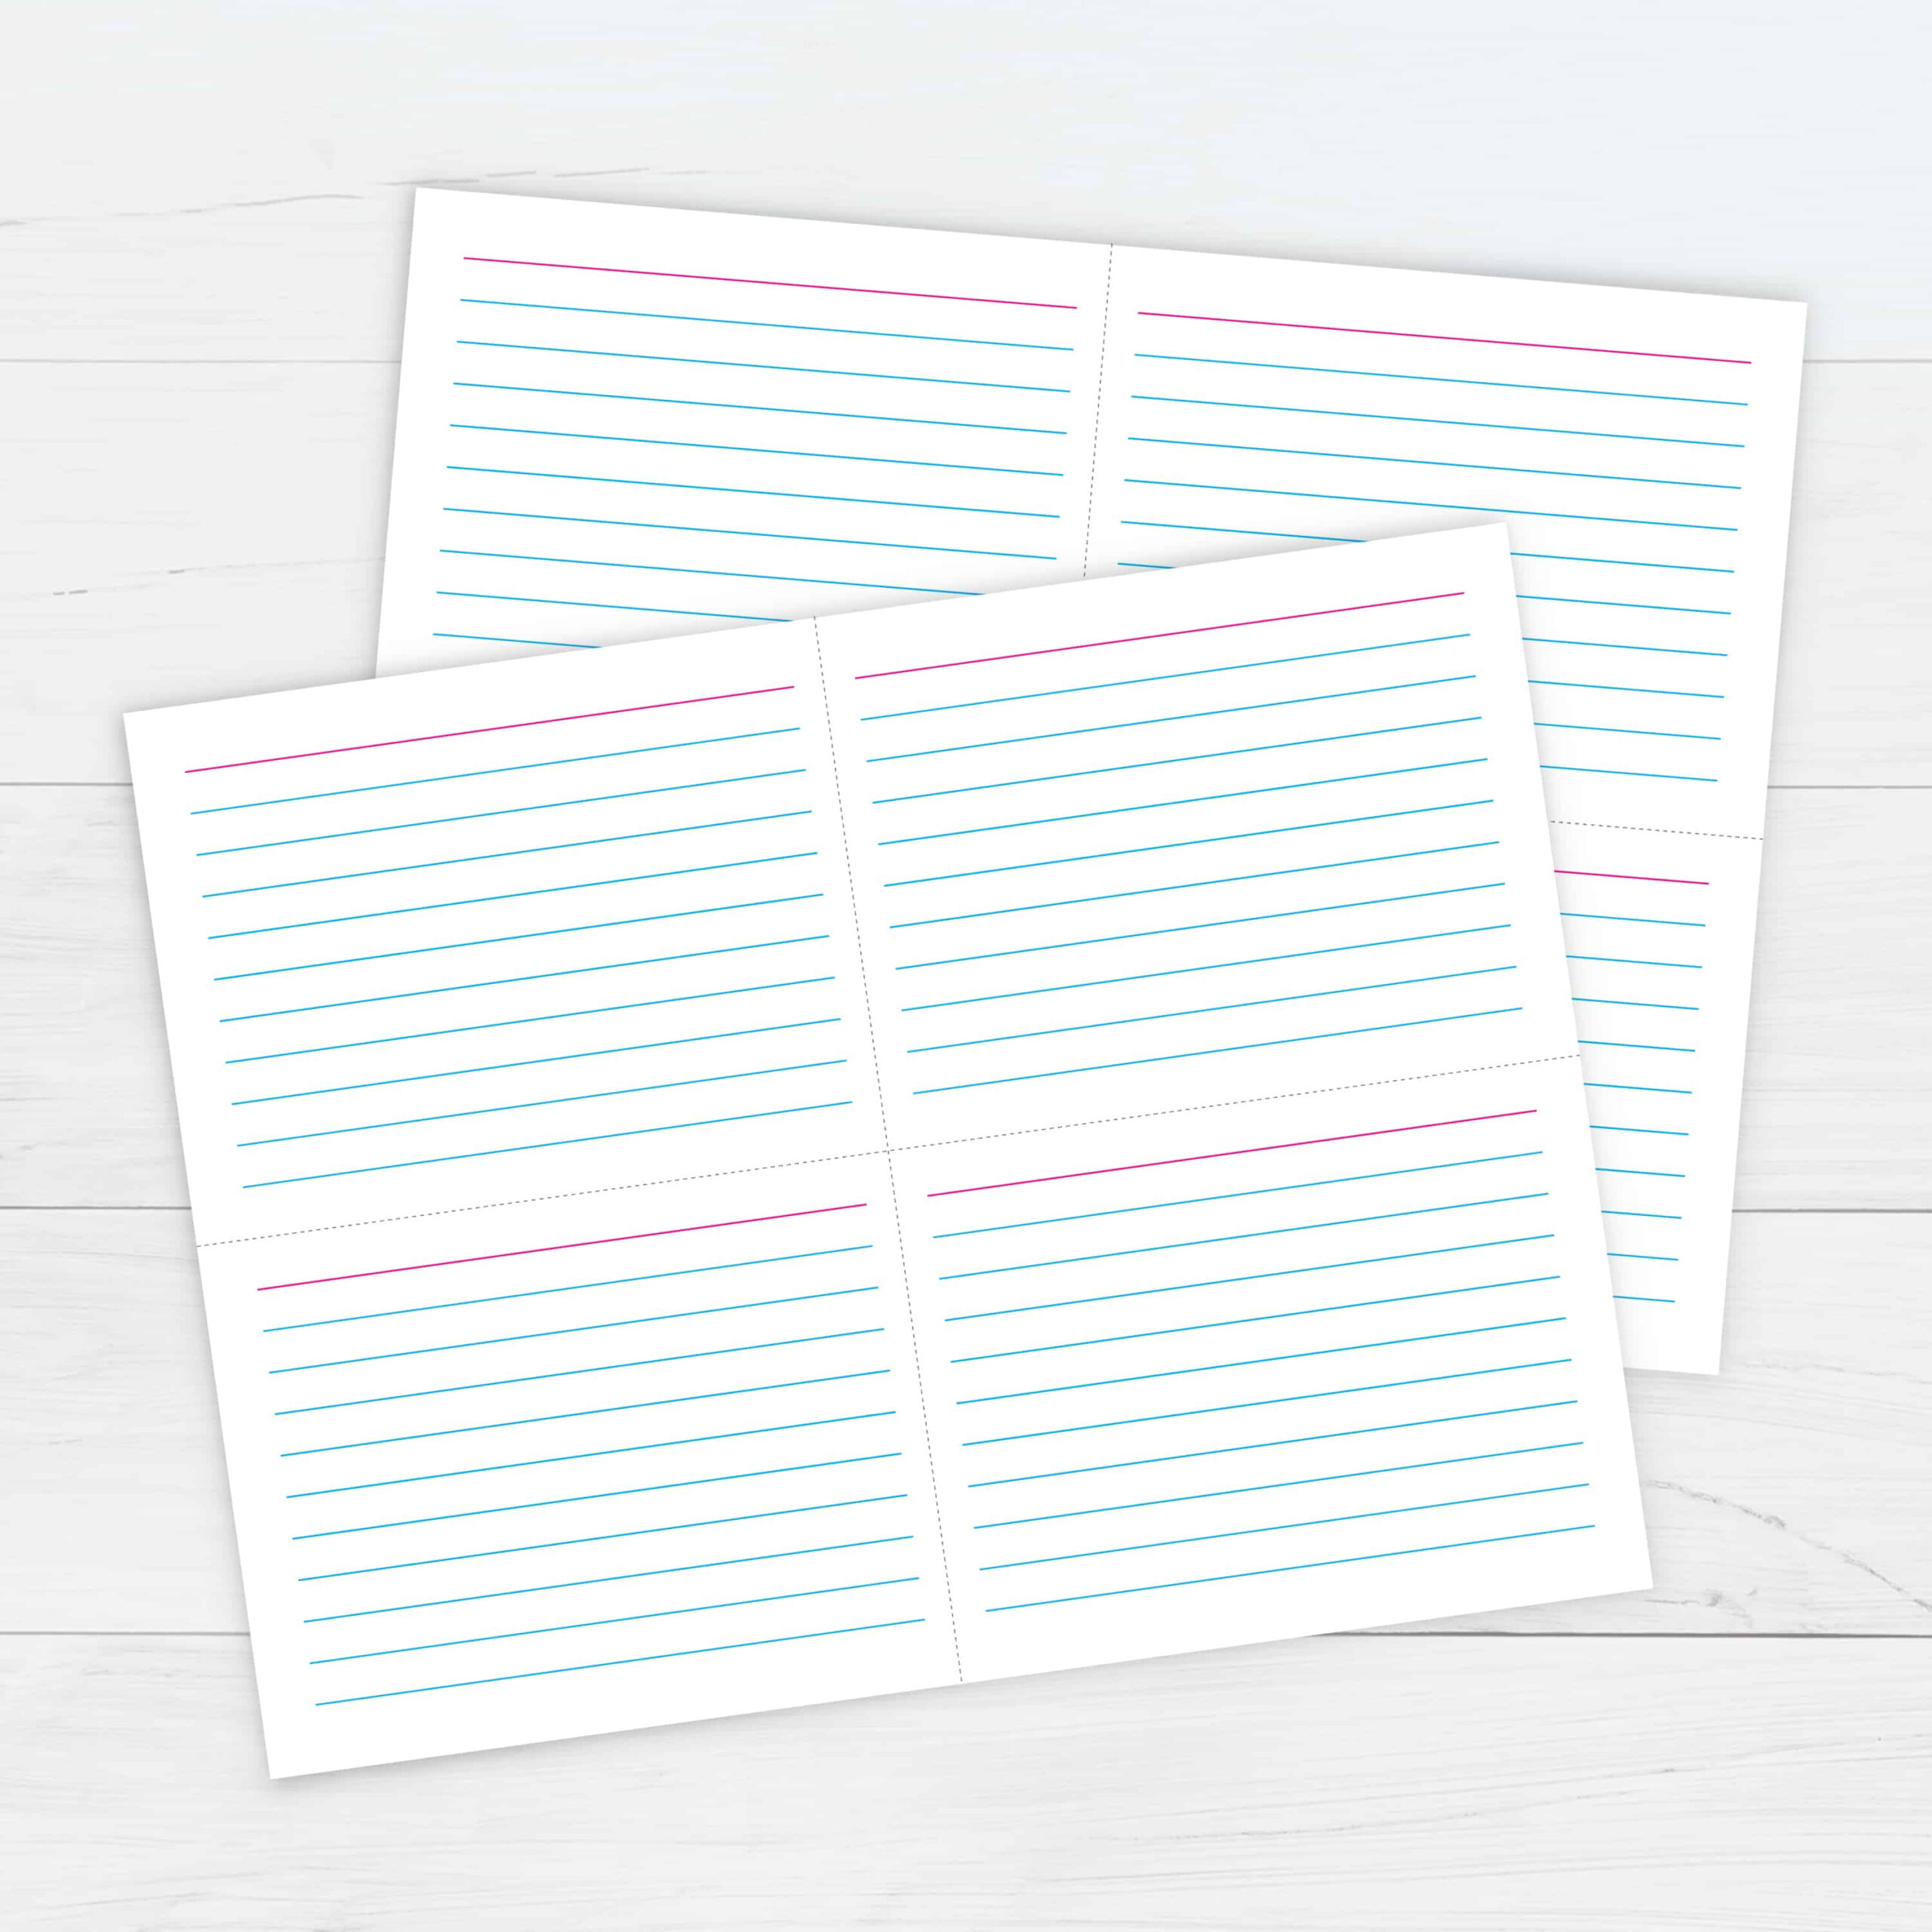 Ruled Index Cards Template - Free Printable Download Within 3X5 Blank Index Card Template